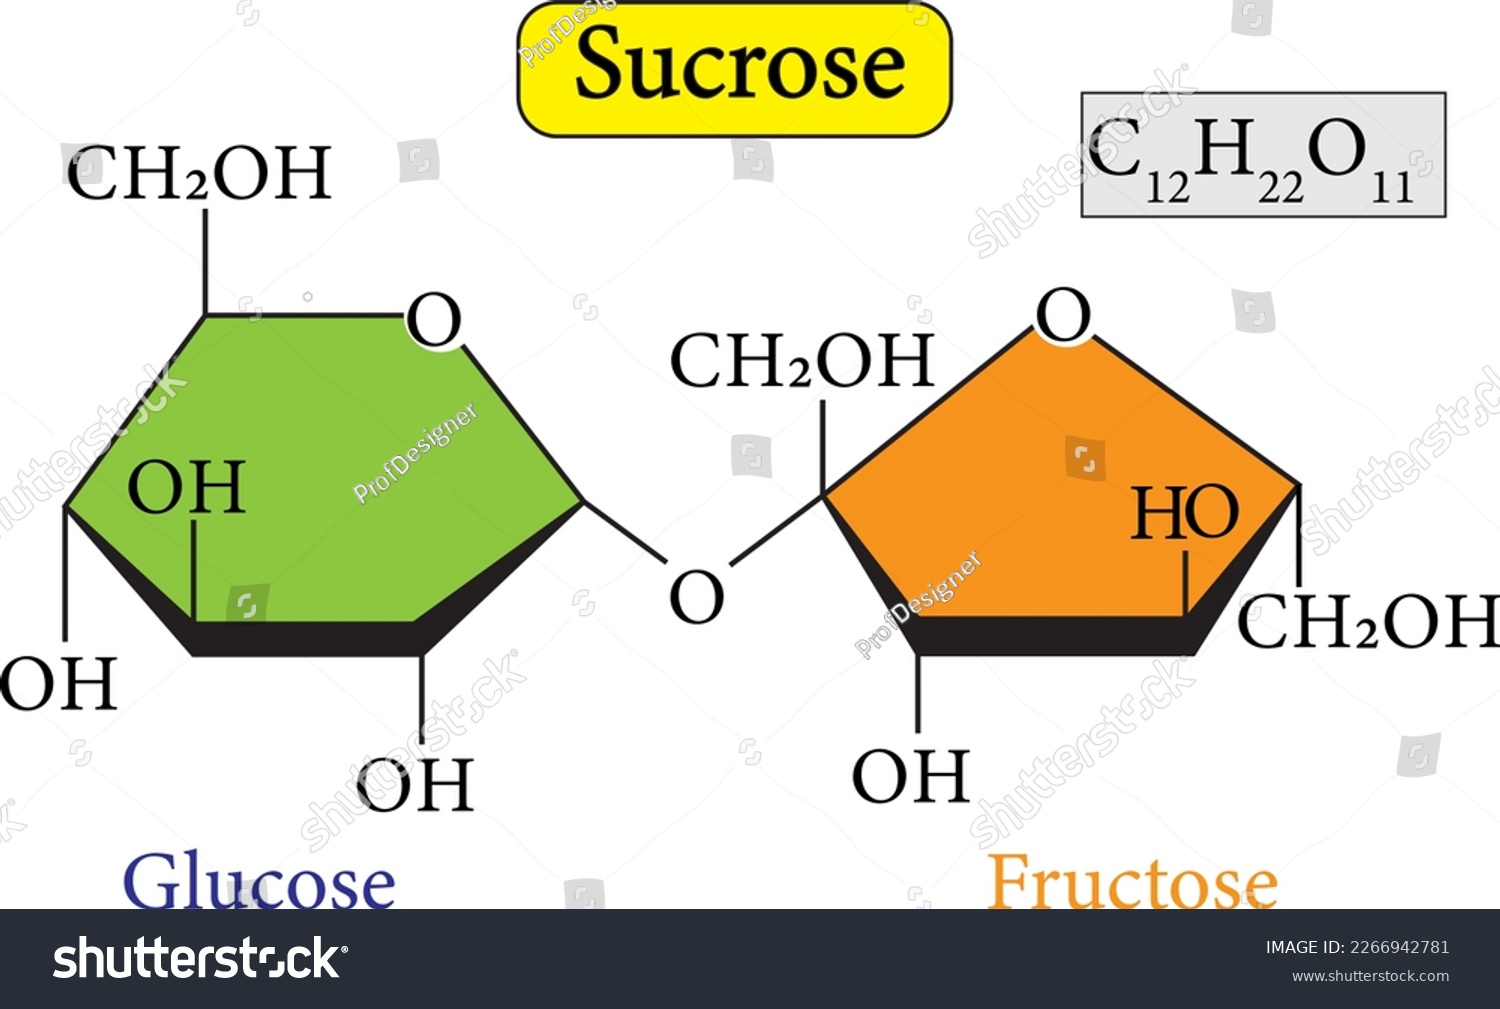 SVG of Sucrose or saccharose is a disaccharide composed of glucose and fructose  svg